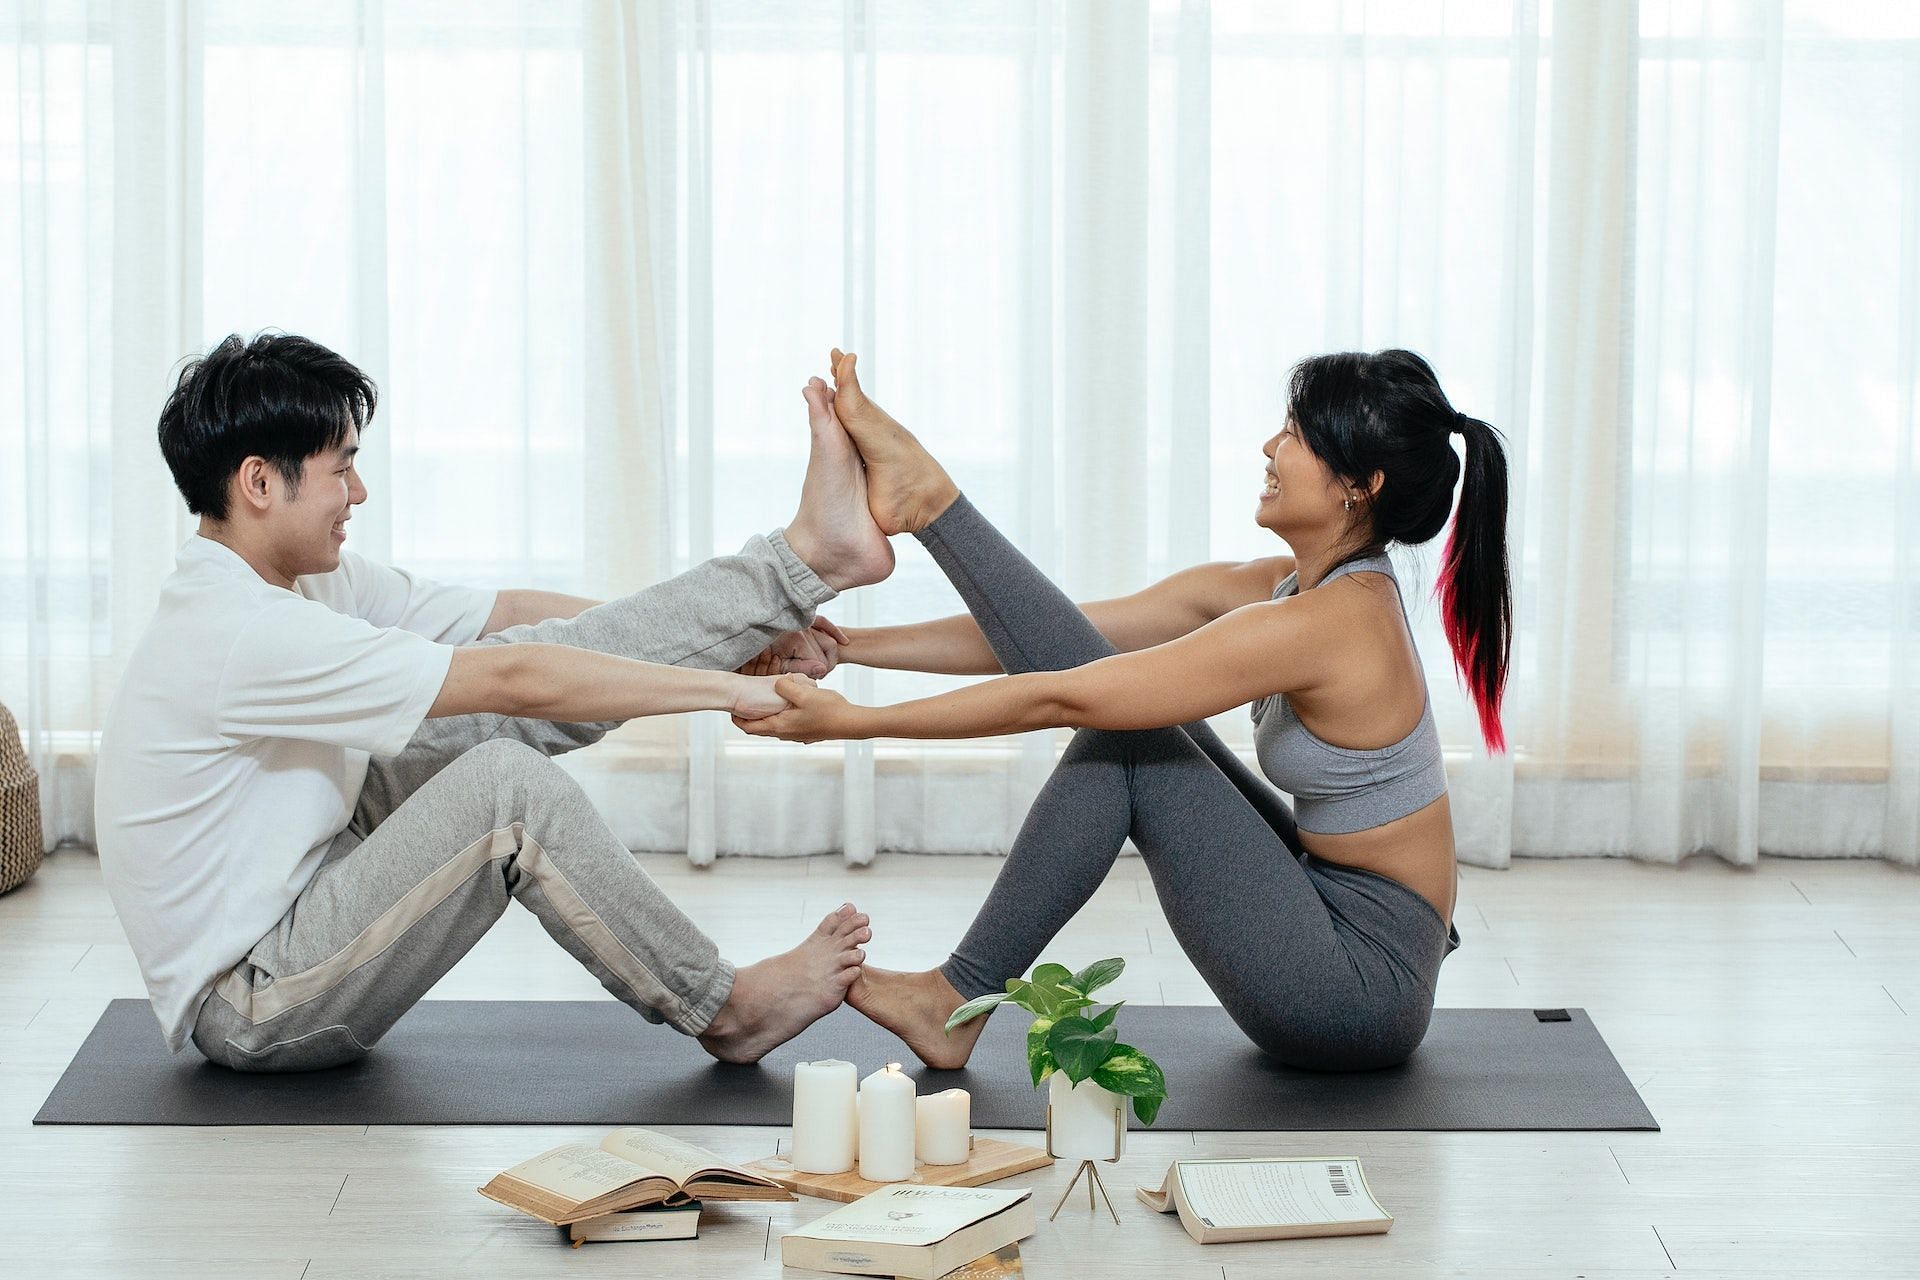 Couples yoga poses are the best way to strengthen your relationship. (Photo via Pexels/Miriam Alonso)